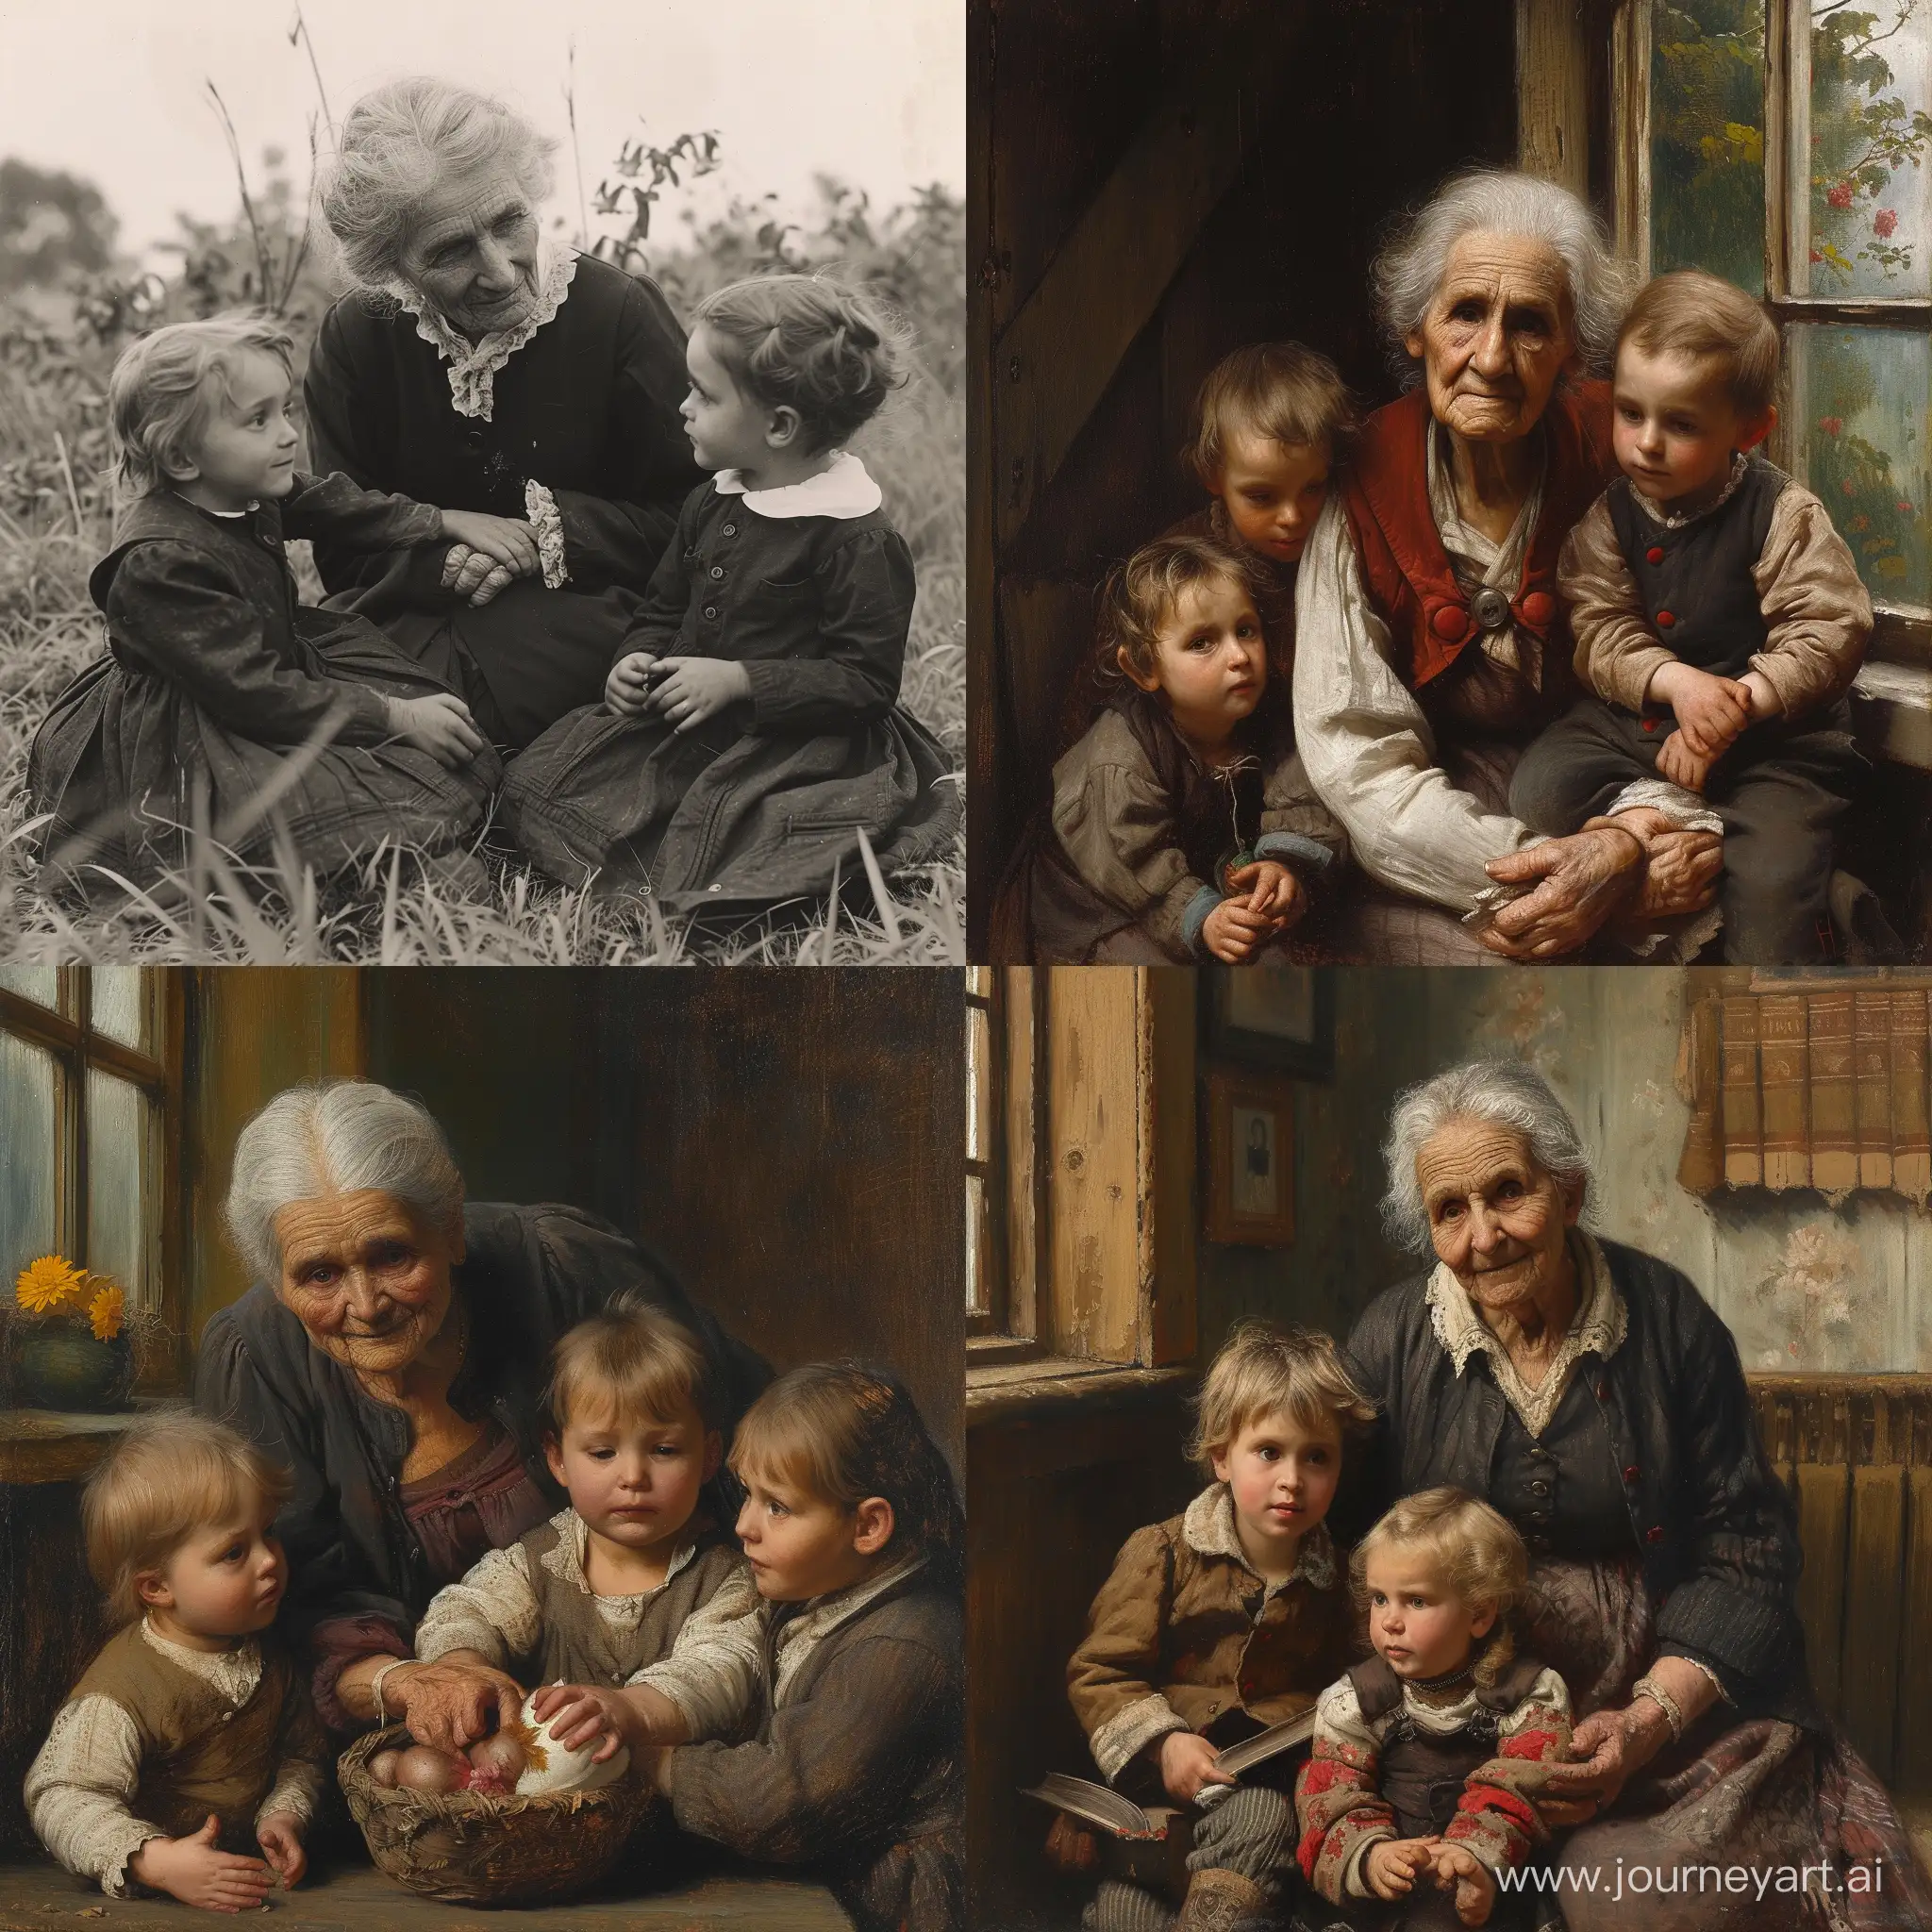 Elderly-Woman-and-Three-Mystery-Kids-Embrace-in-Nostalgic-Gathering